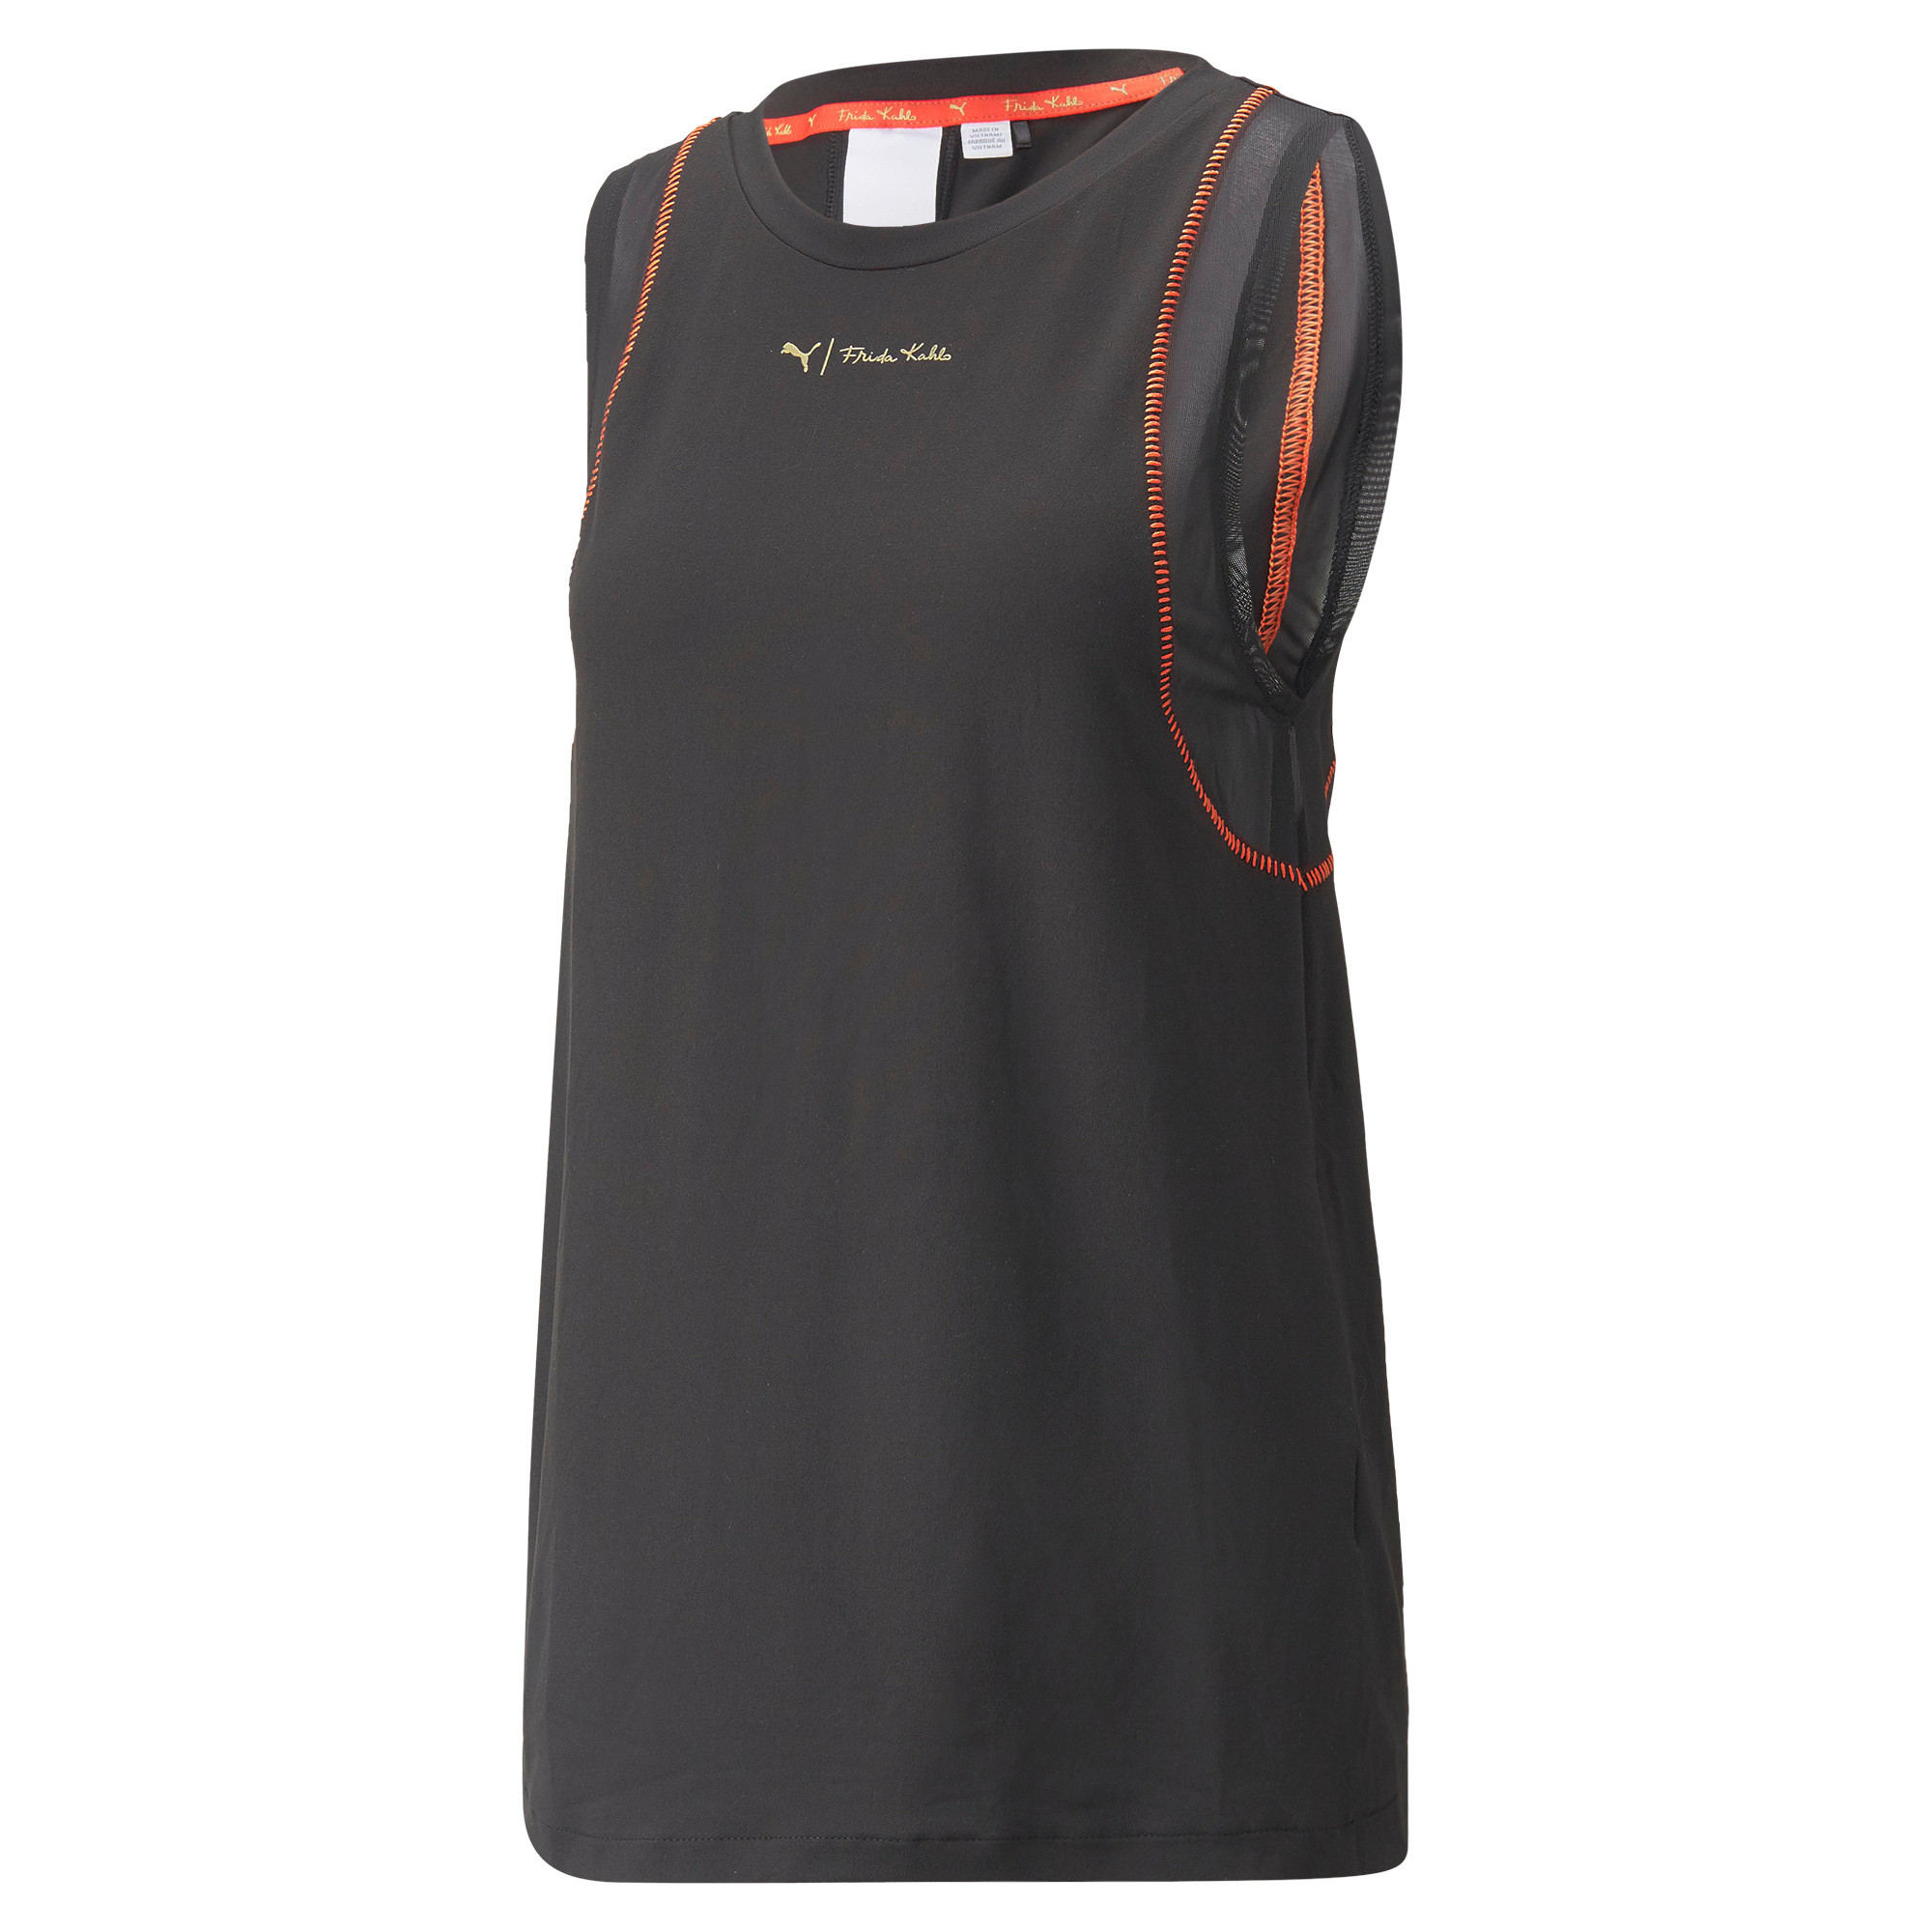 Training Tank in drycell, Black, large image number 0